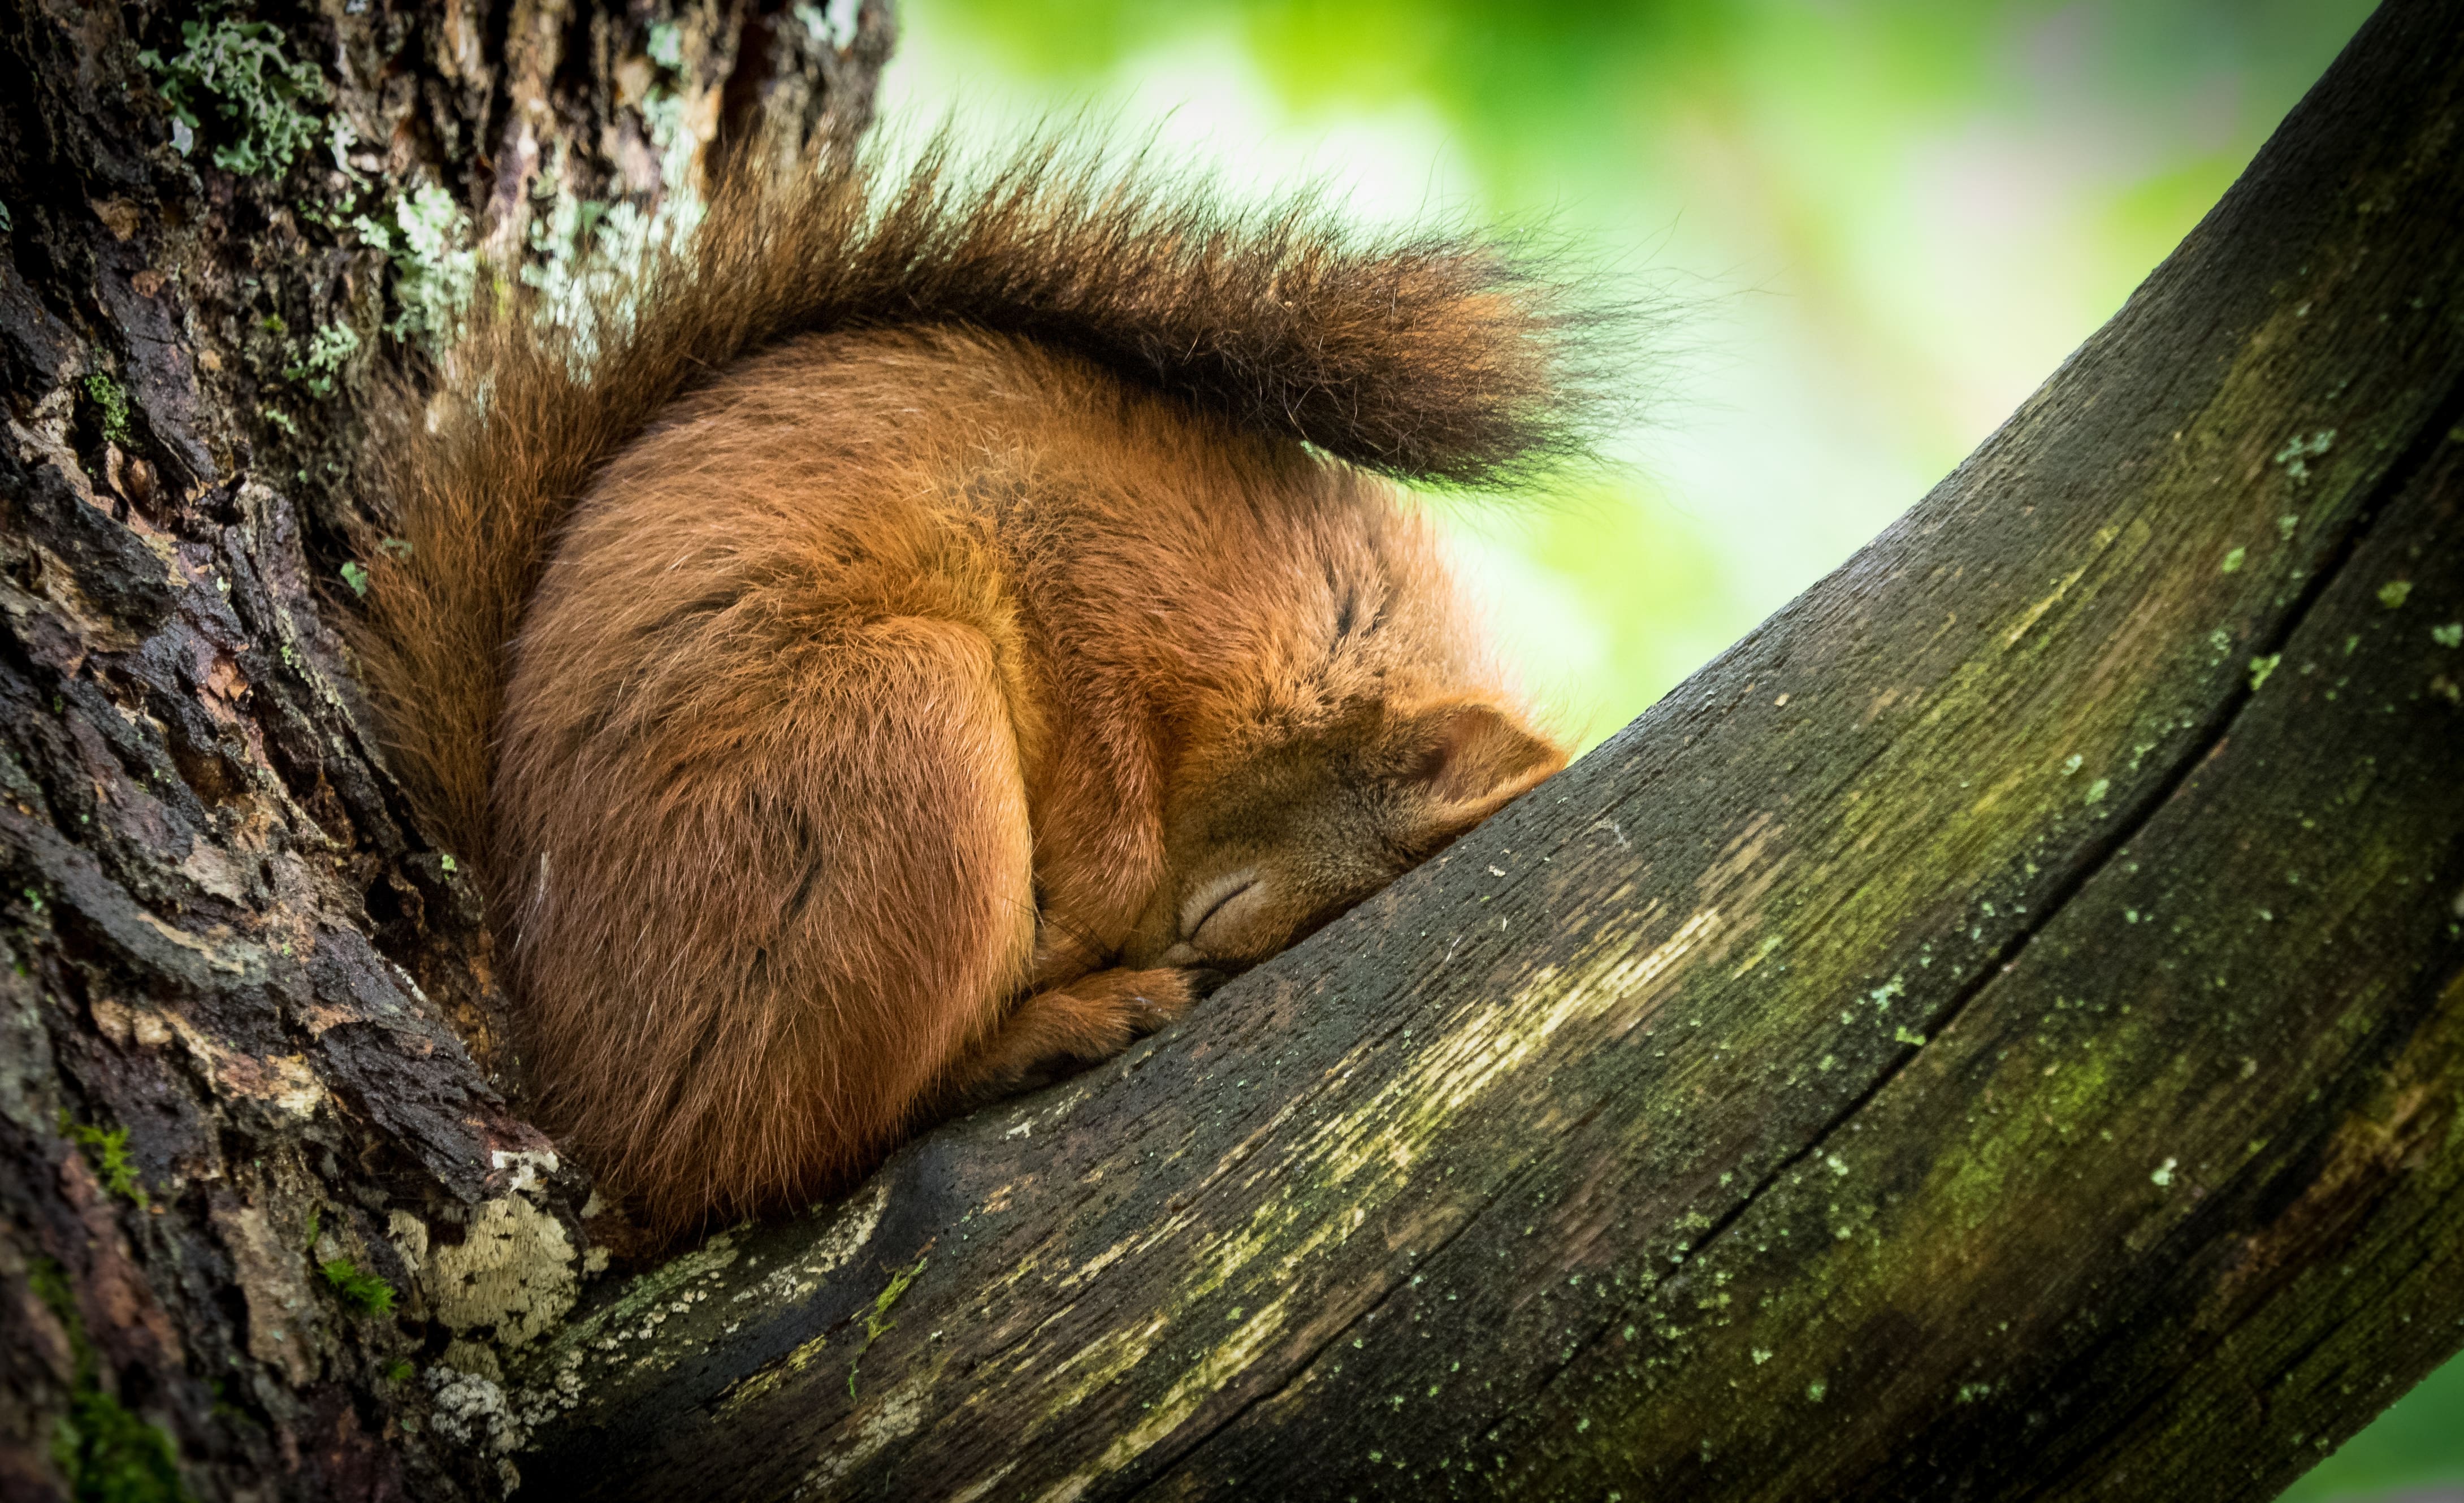 A red squirrel sleeping between two branches